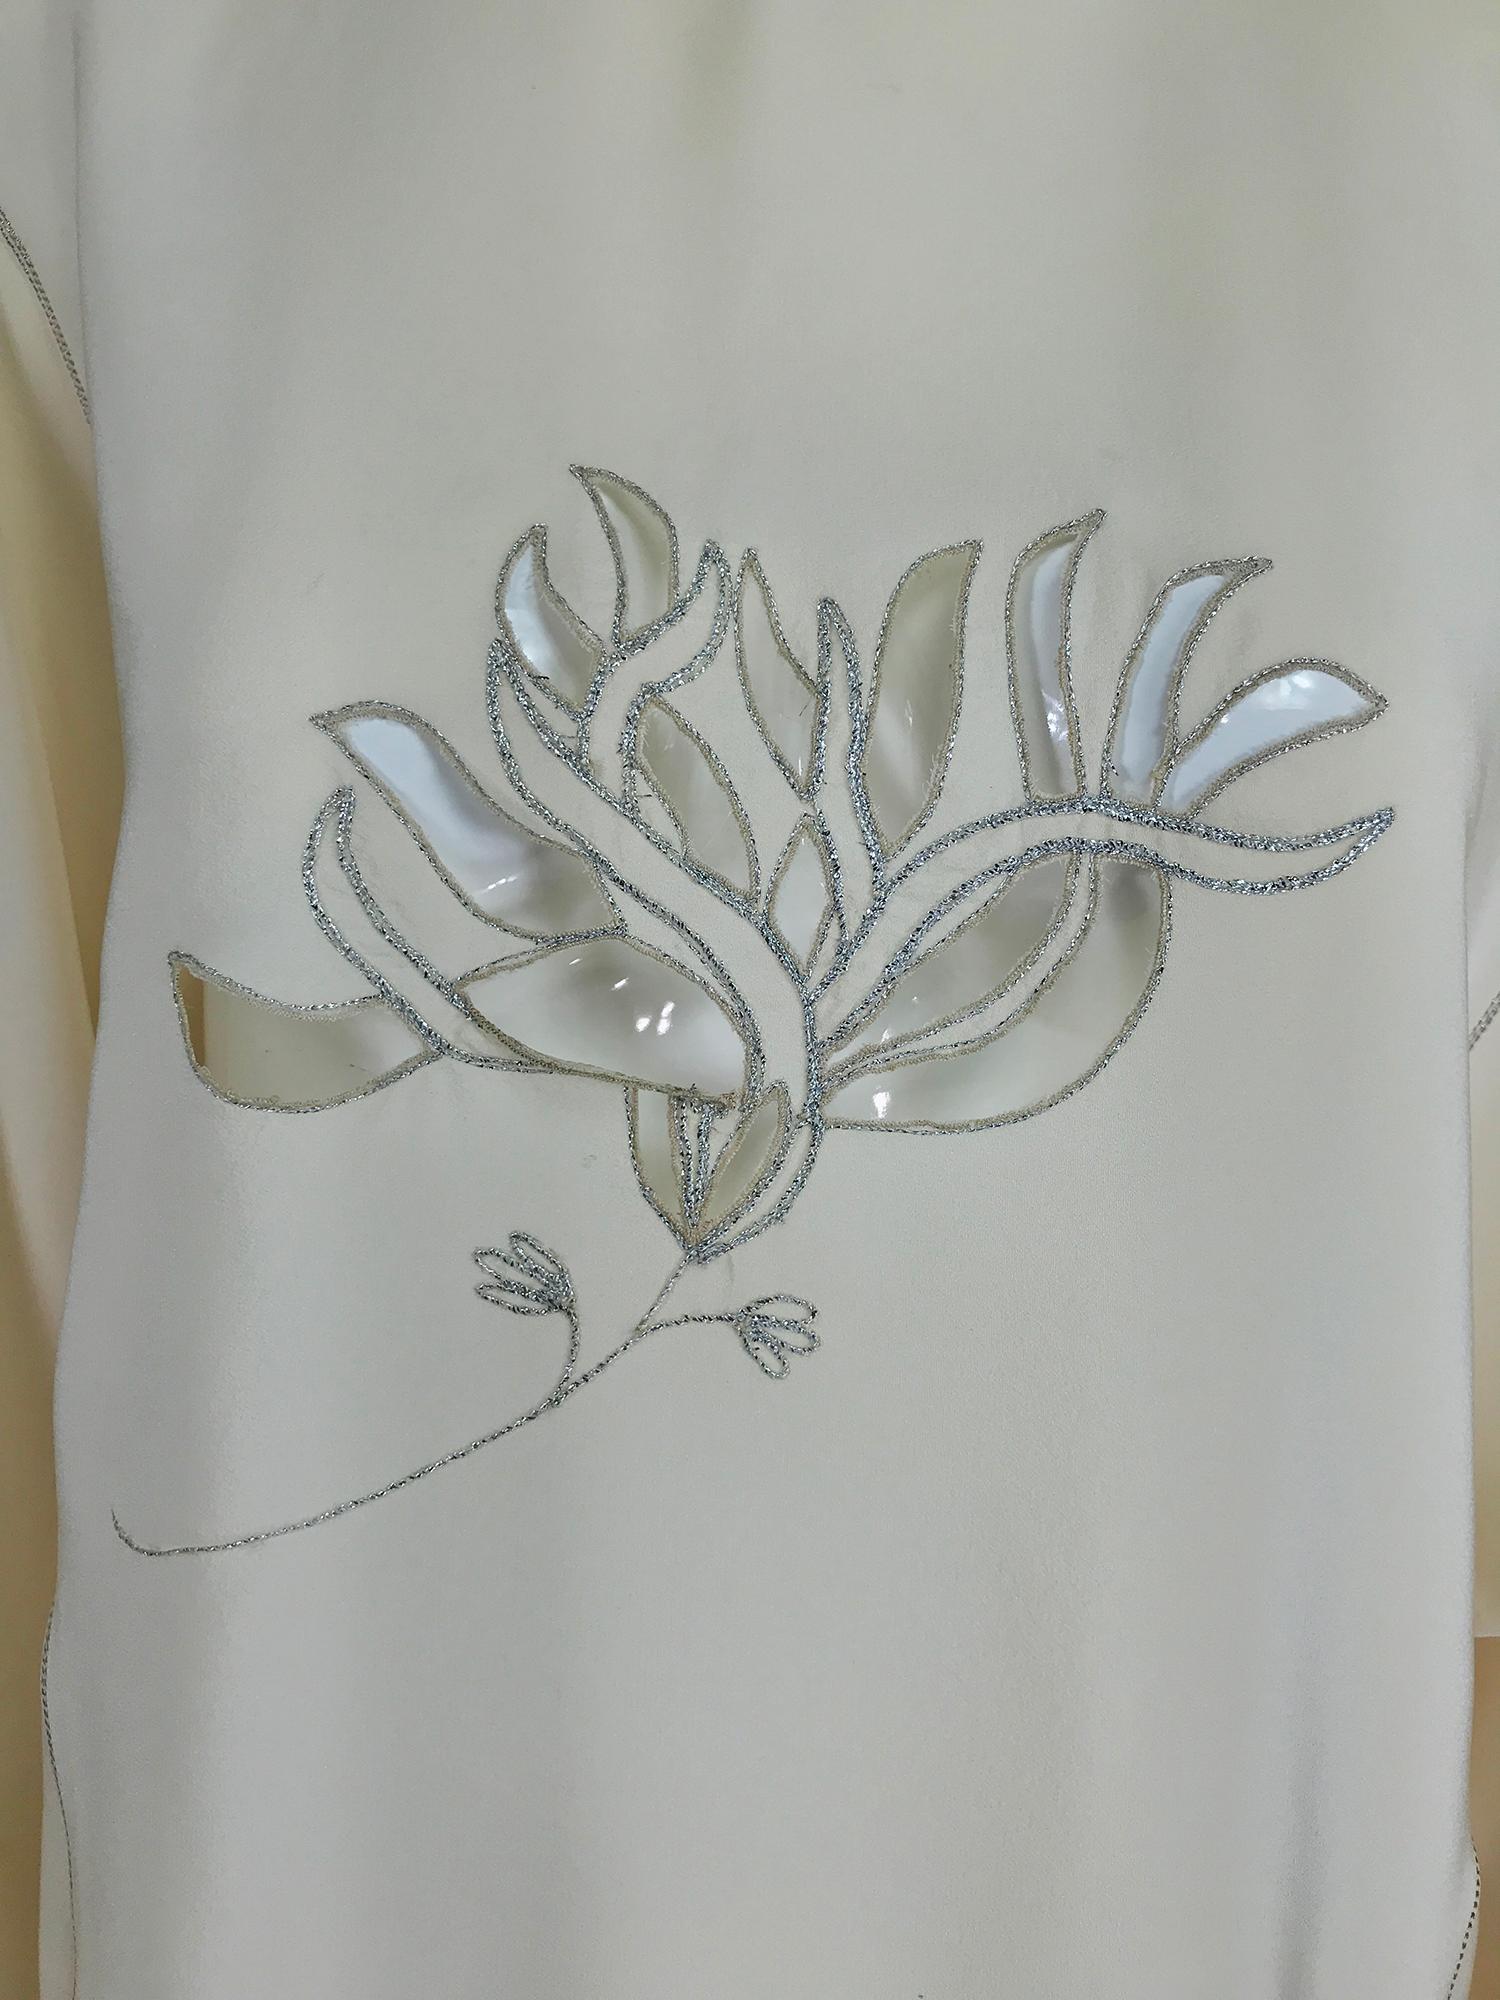 Vintage Bernard Perris, cream silk with silver metallic thread peek a boo, flower front blouse from the 1980s. Lightweight silk crepe with silver metallic stitching, the blouse has a stand up collar with a V at the top, there are 2 applied loops at